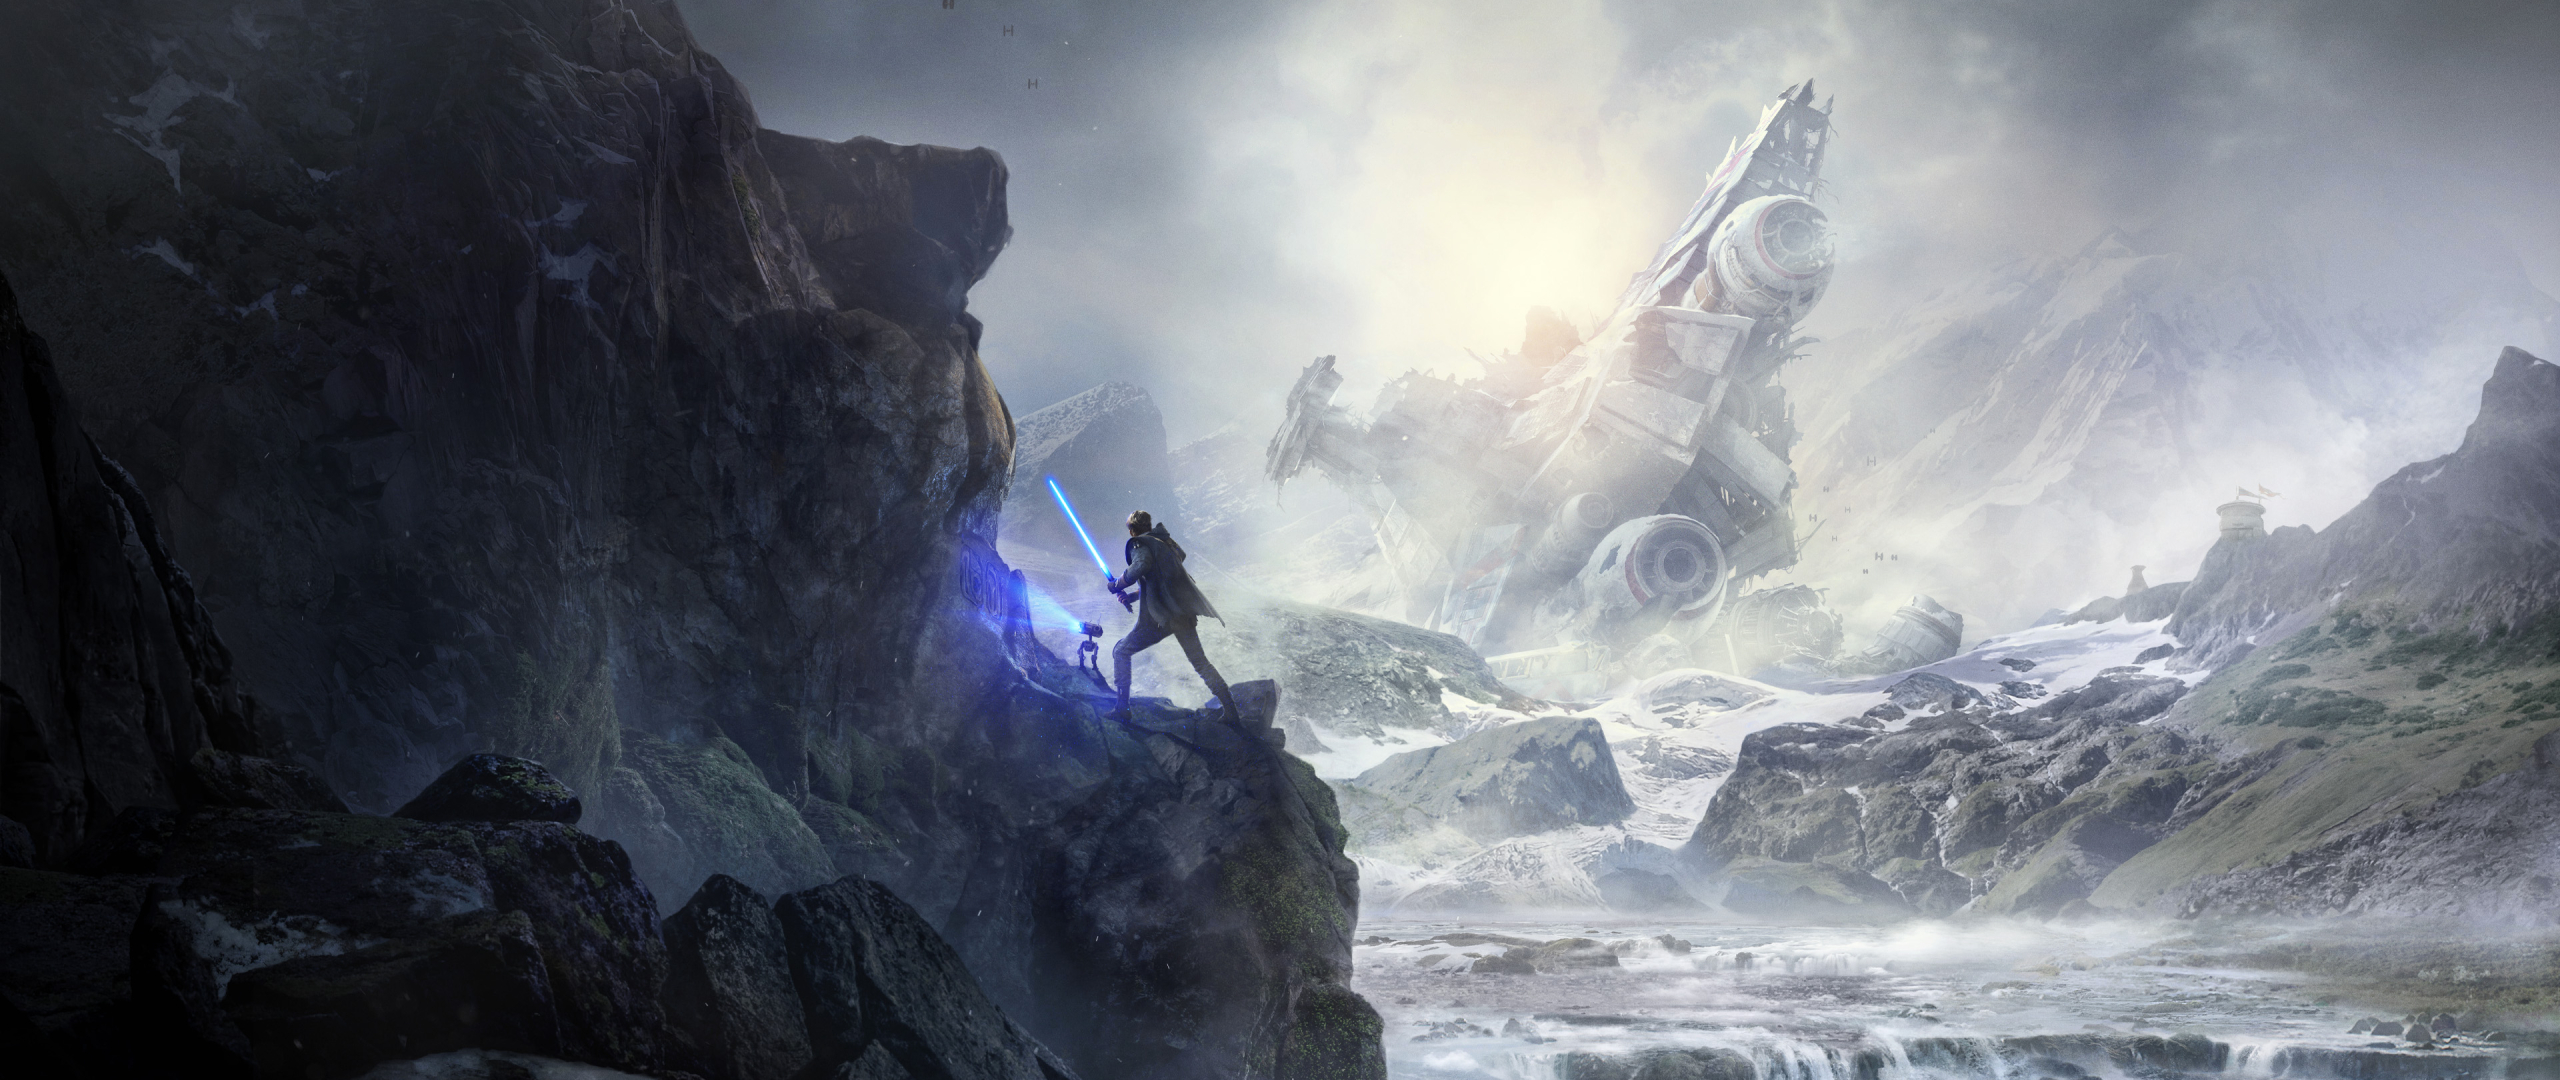 2560x1080 Star Wars Jedi Fallen Order 2560x1080 Resolution Wallpaper Hd Games 4k Wallpapers Images Photos And Background